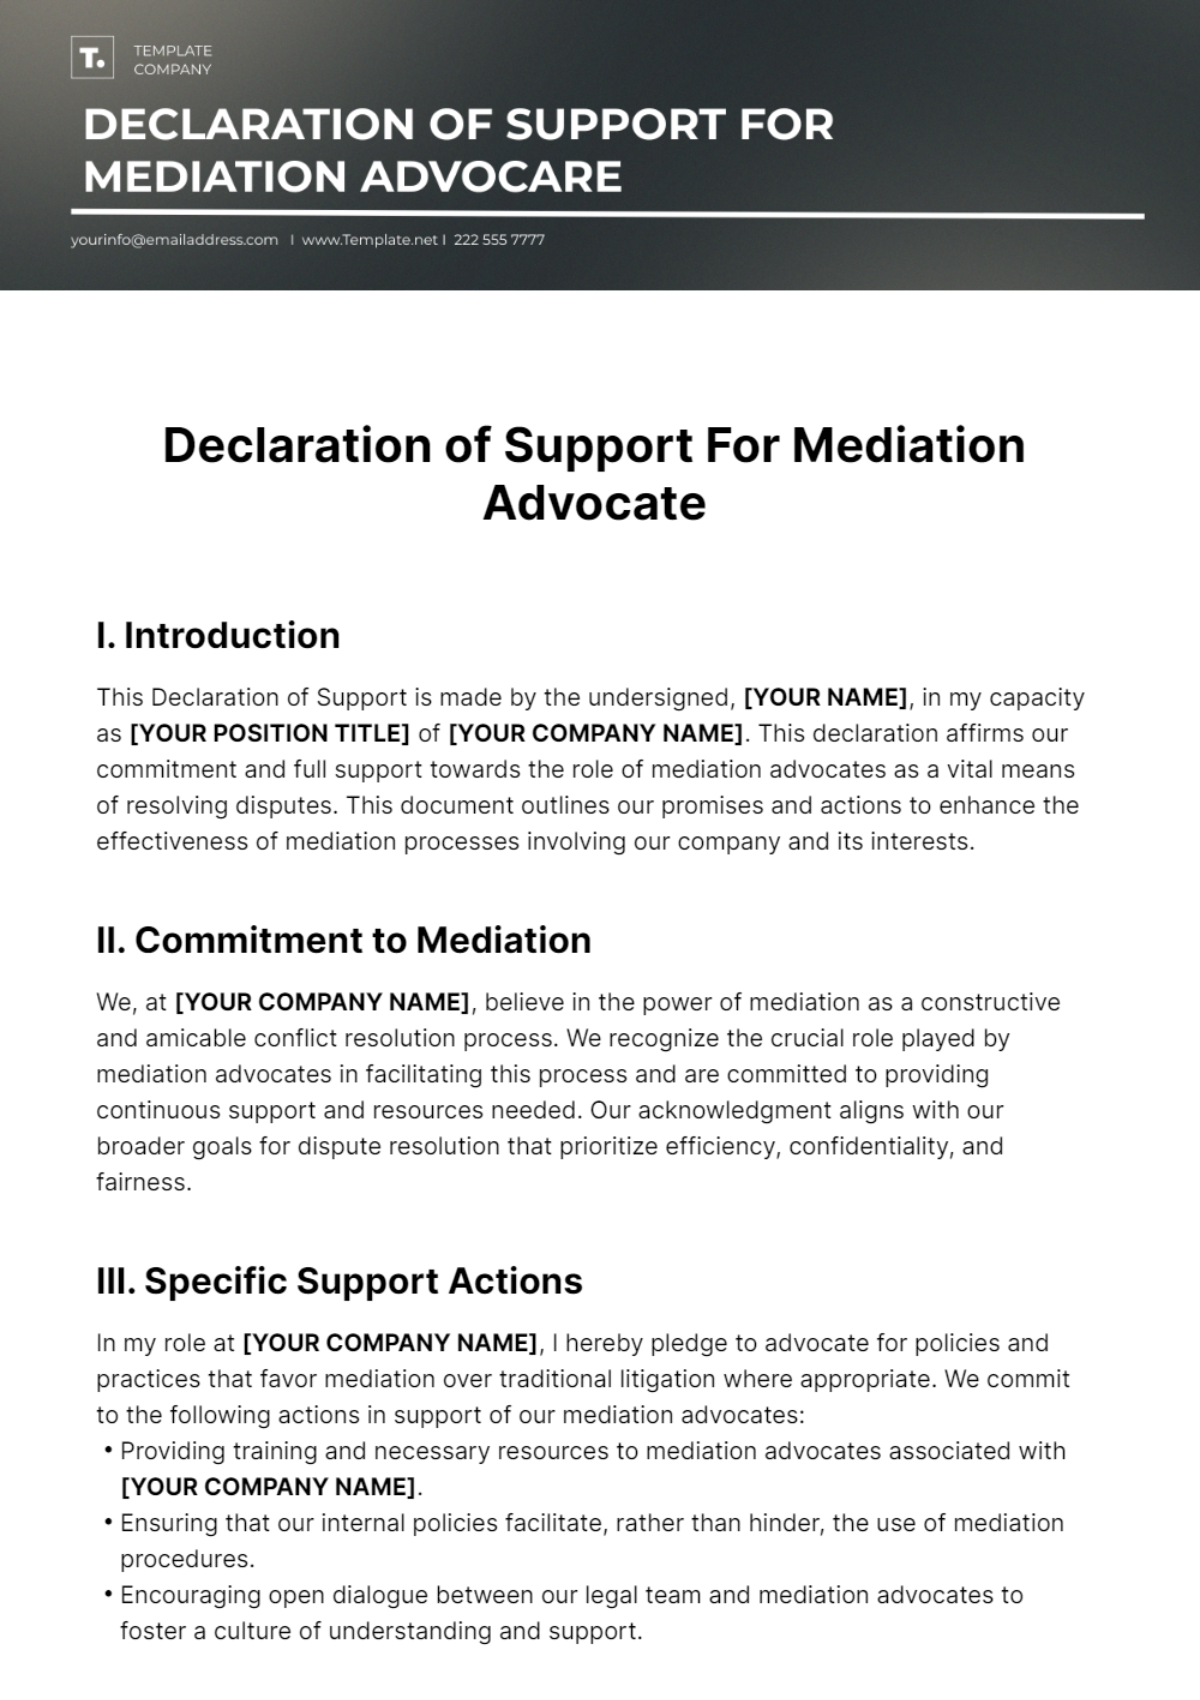 Declaration of Support For Mediation Advocate Template